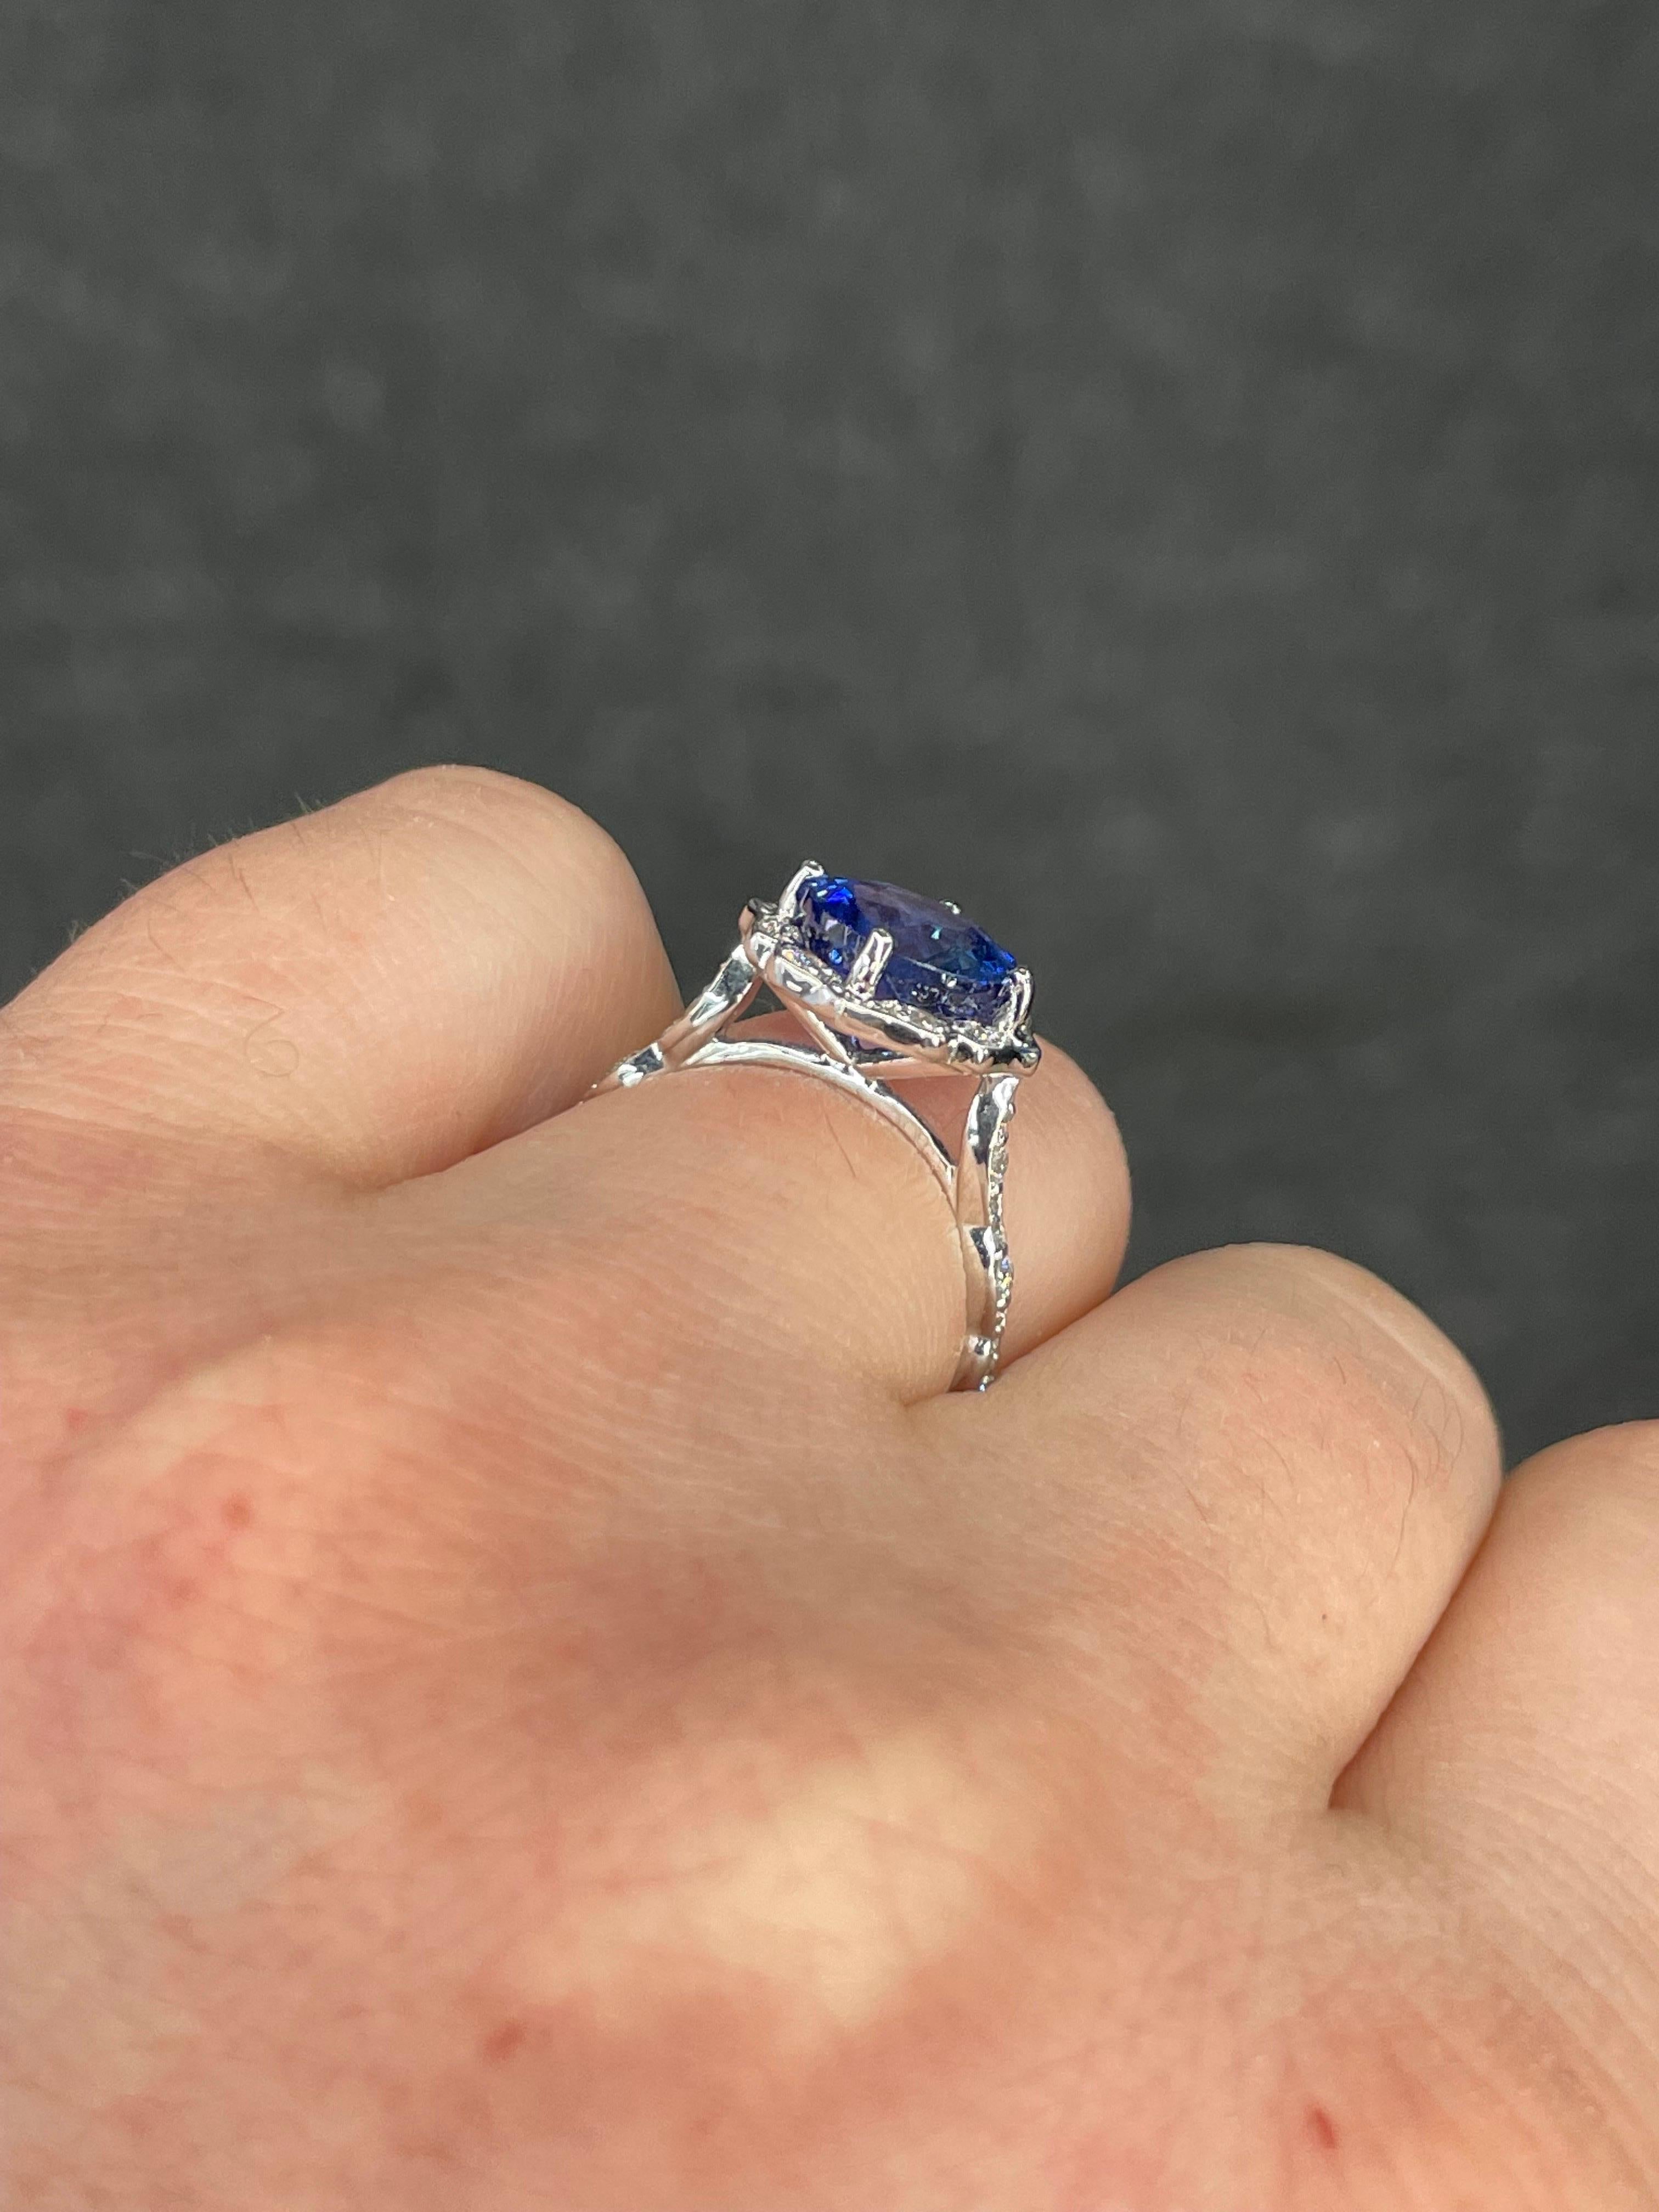 Antique Inspired Sapphire Diamond Halo Ring 4.07 Carats 14 Karat White Gold For Sale 1